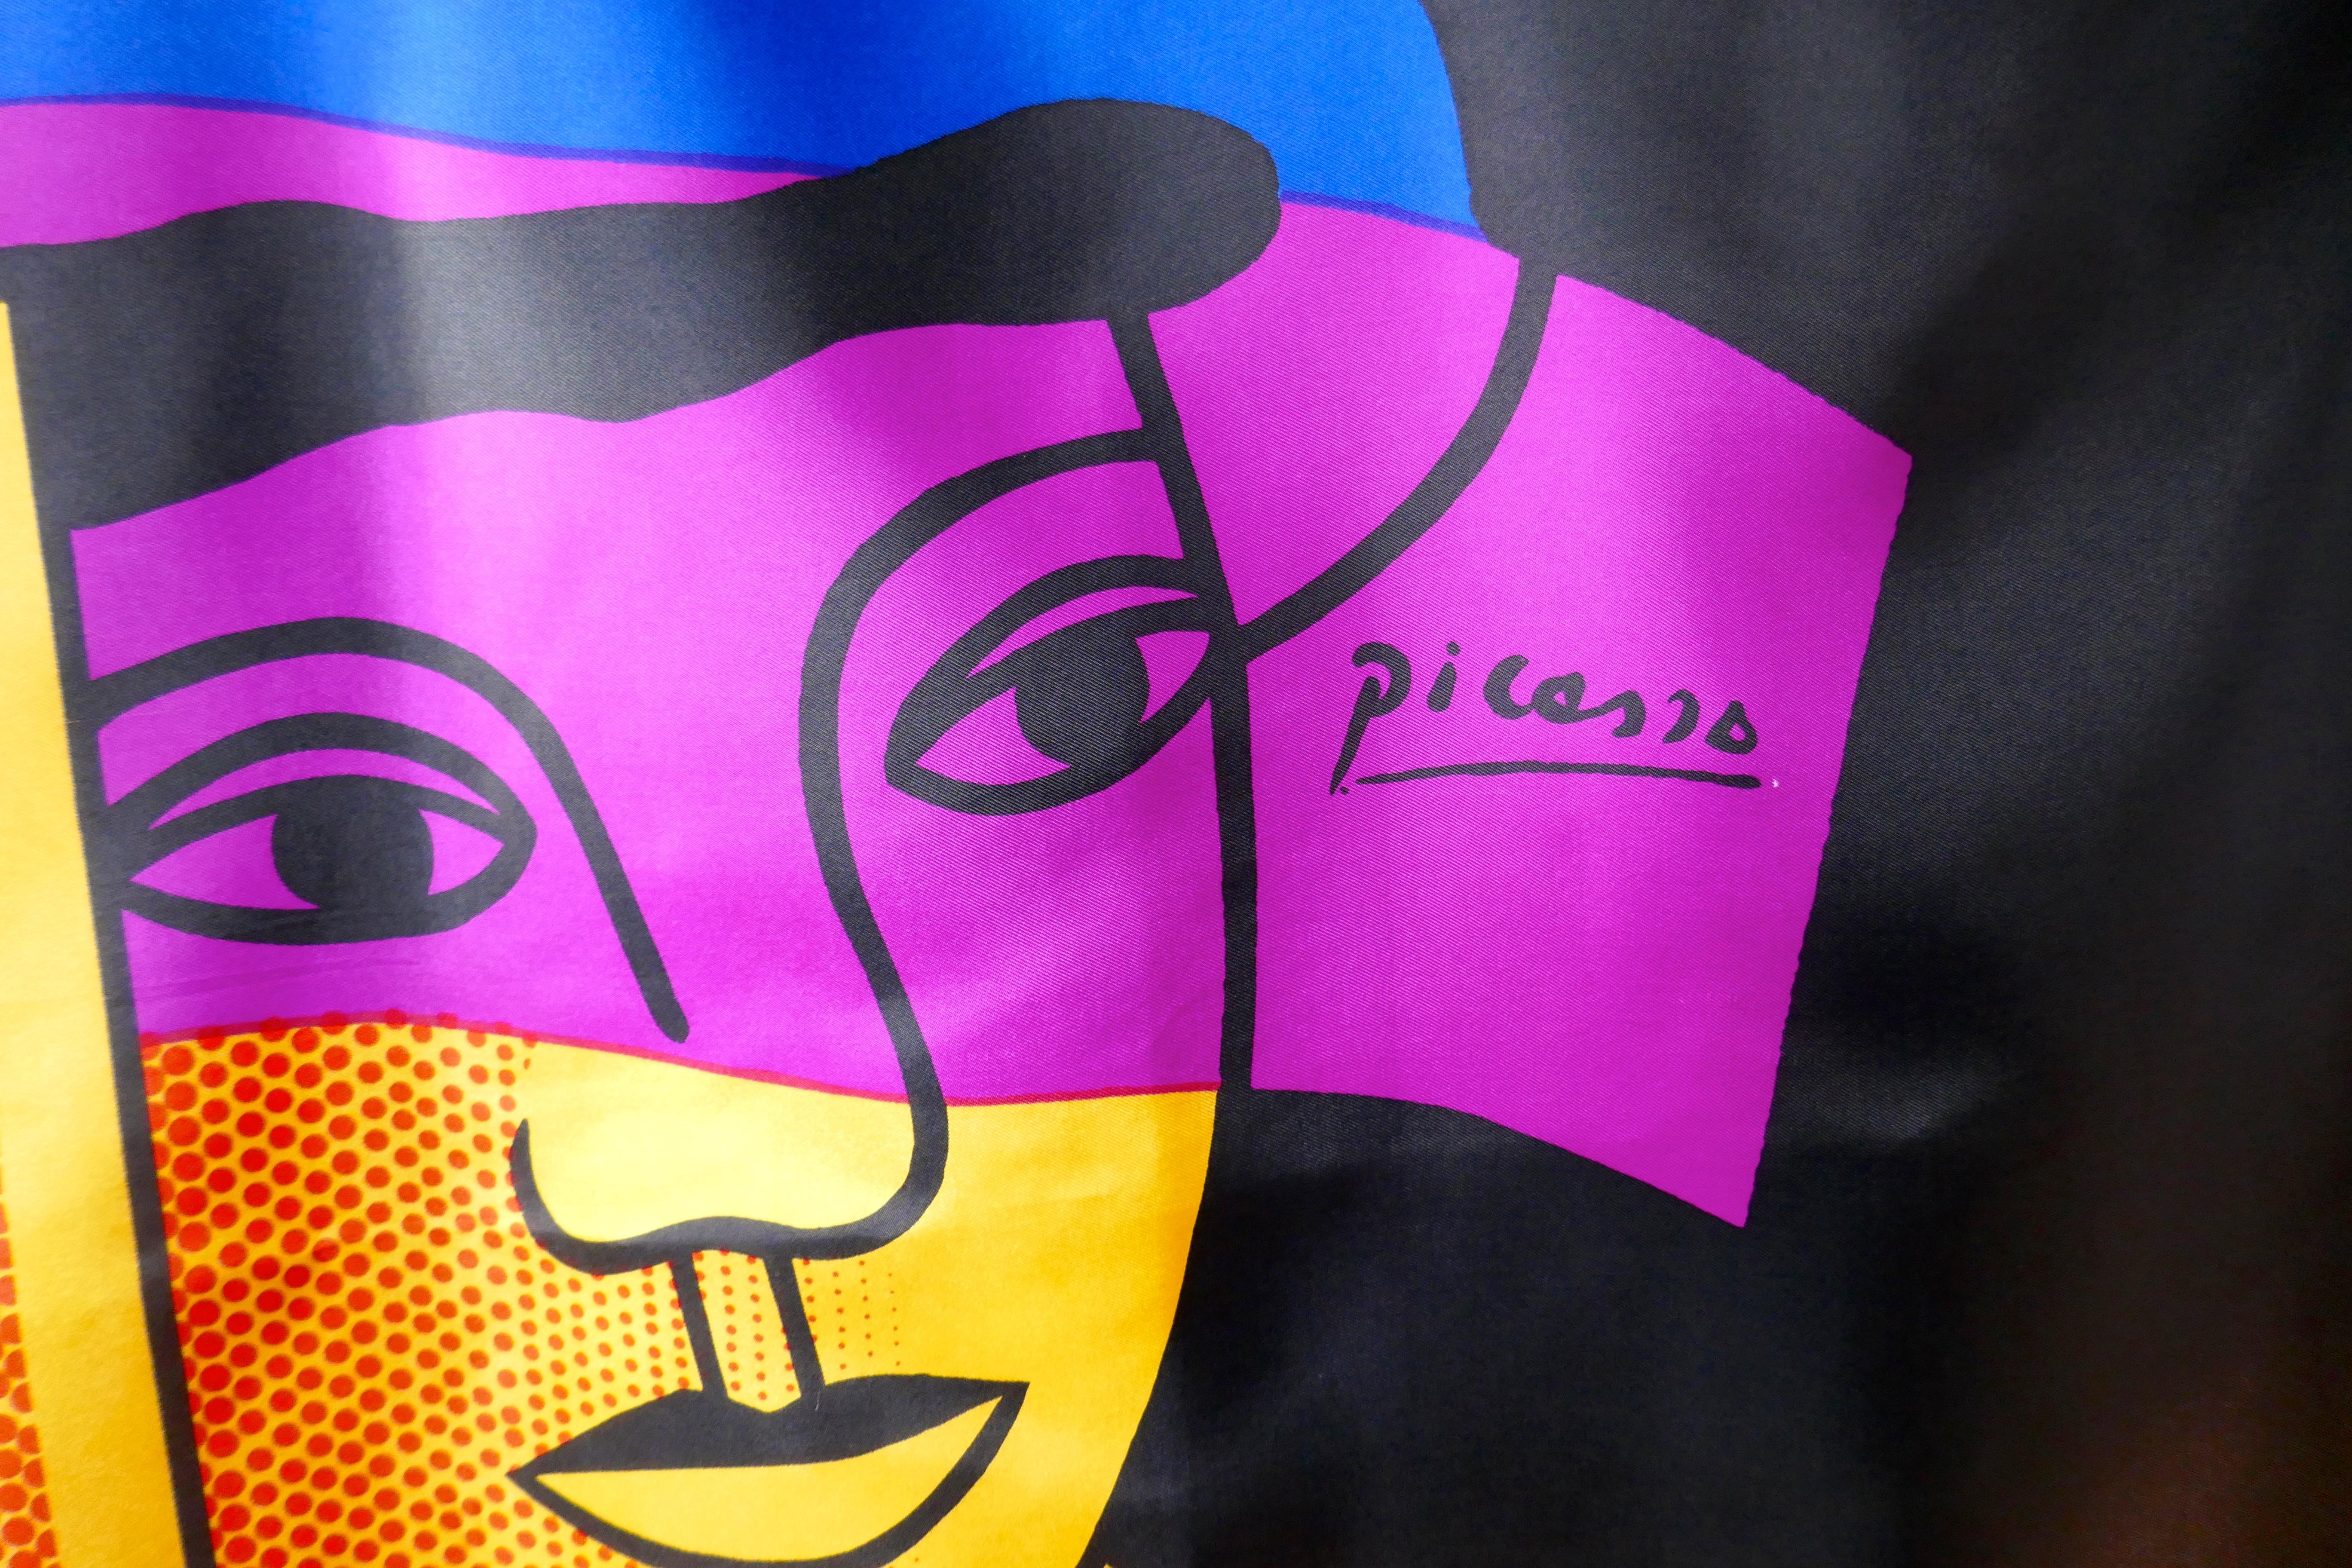 Large Colourful Vintage Satin Scarf, Abstract Cubist Picasso Portrait  

1980s Classic Portrait of a couple signed “Picasso” Vibrant colourway definitely one for the collector
Scarf  Measures 35”x 33”
Silk Satin  
 

The Scarf is genuine vintage and